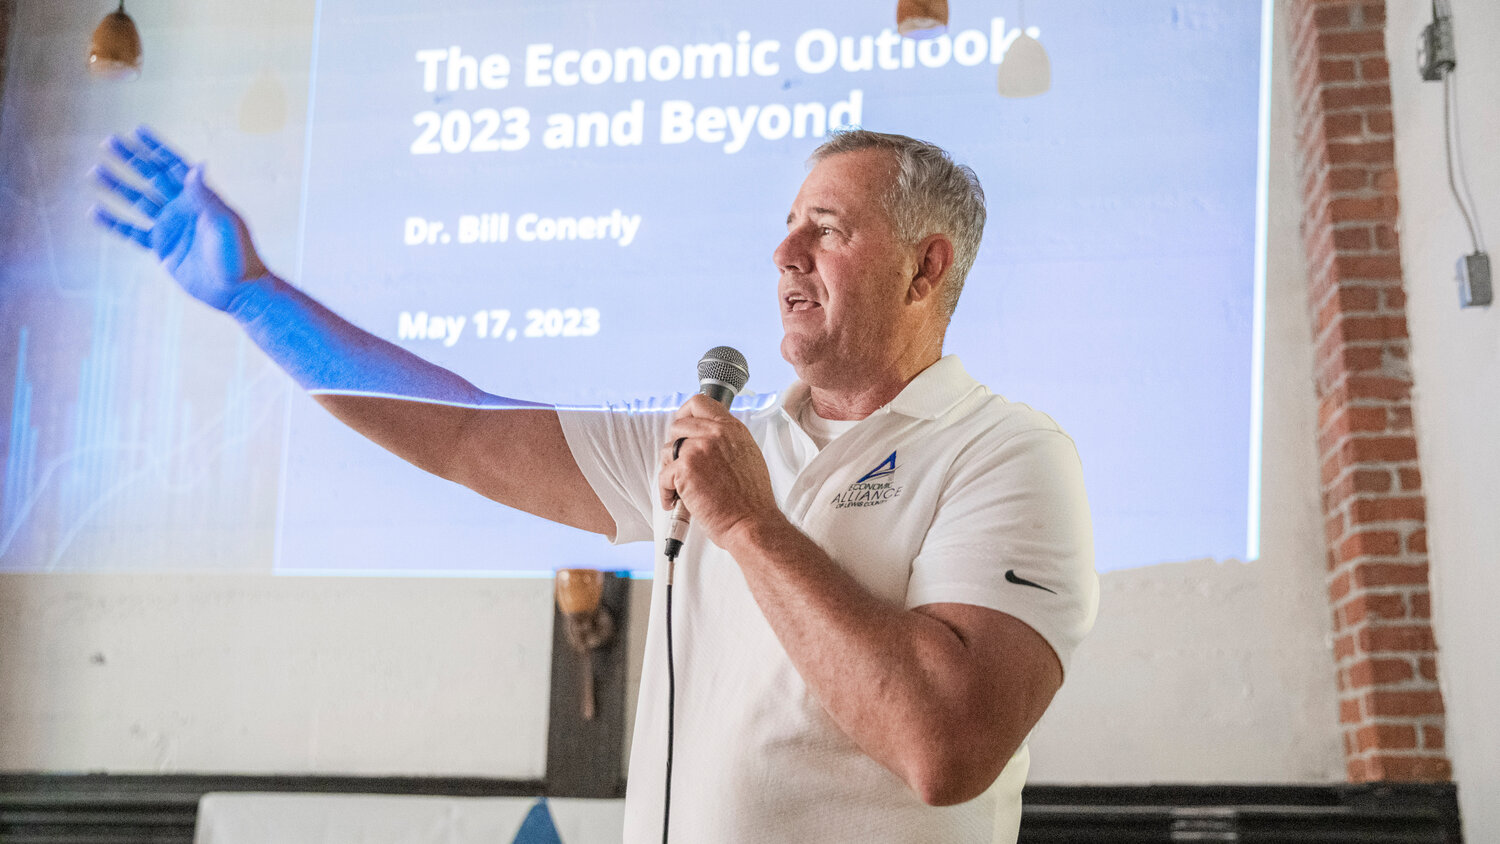 Richard DeBolt, Executive Director for the Economic Alliance of Lewis County, introduces Dr. Bill Conerly and an economic forecast presentation at The Juice Box in Centralia on Wednesday, May 17.